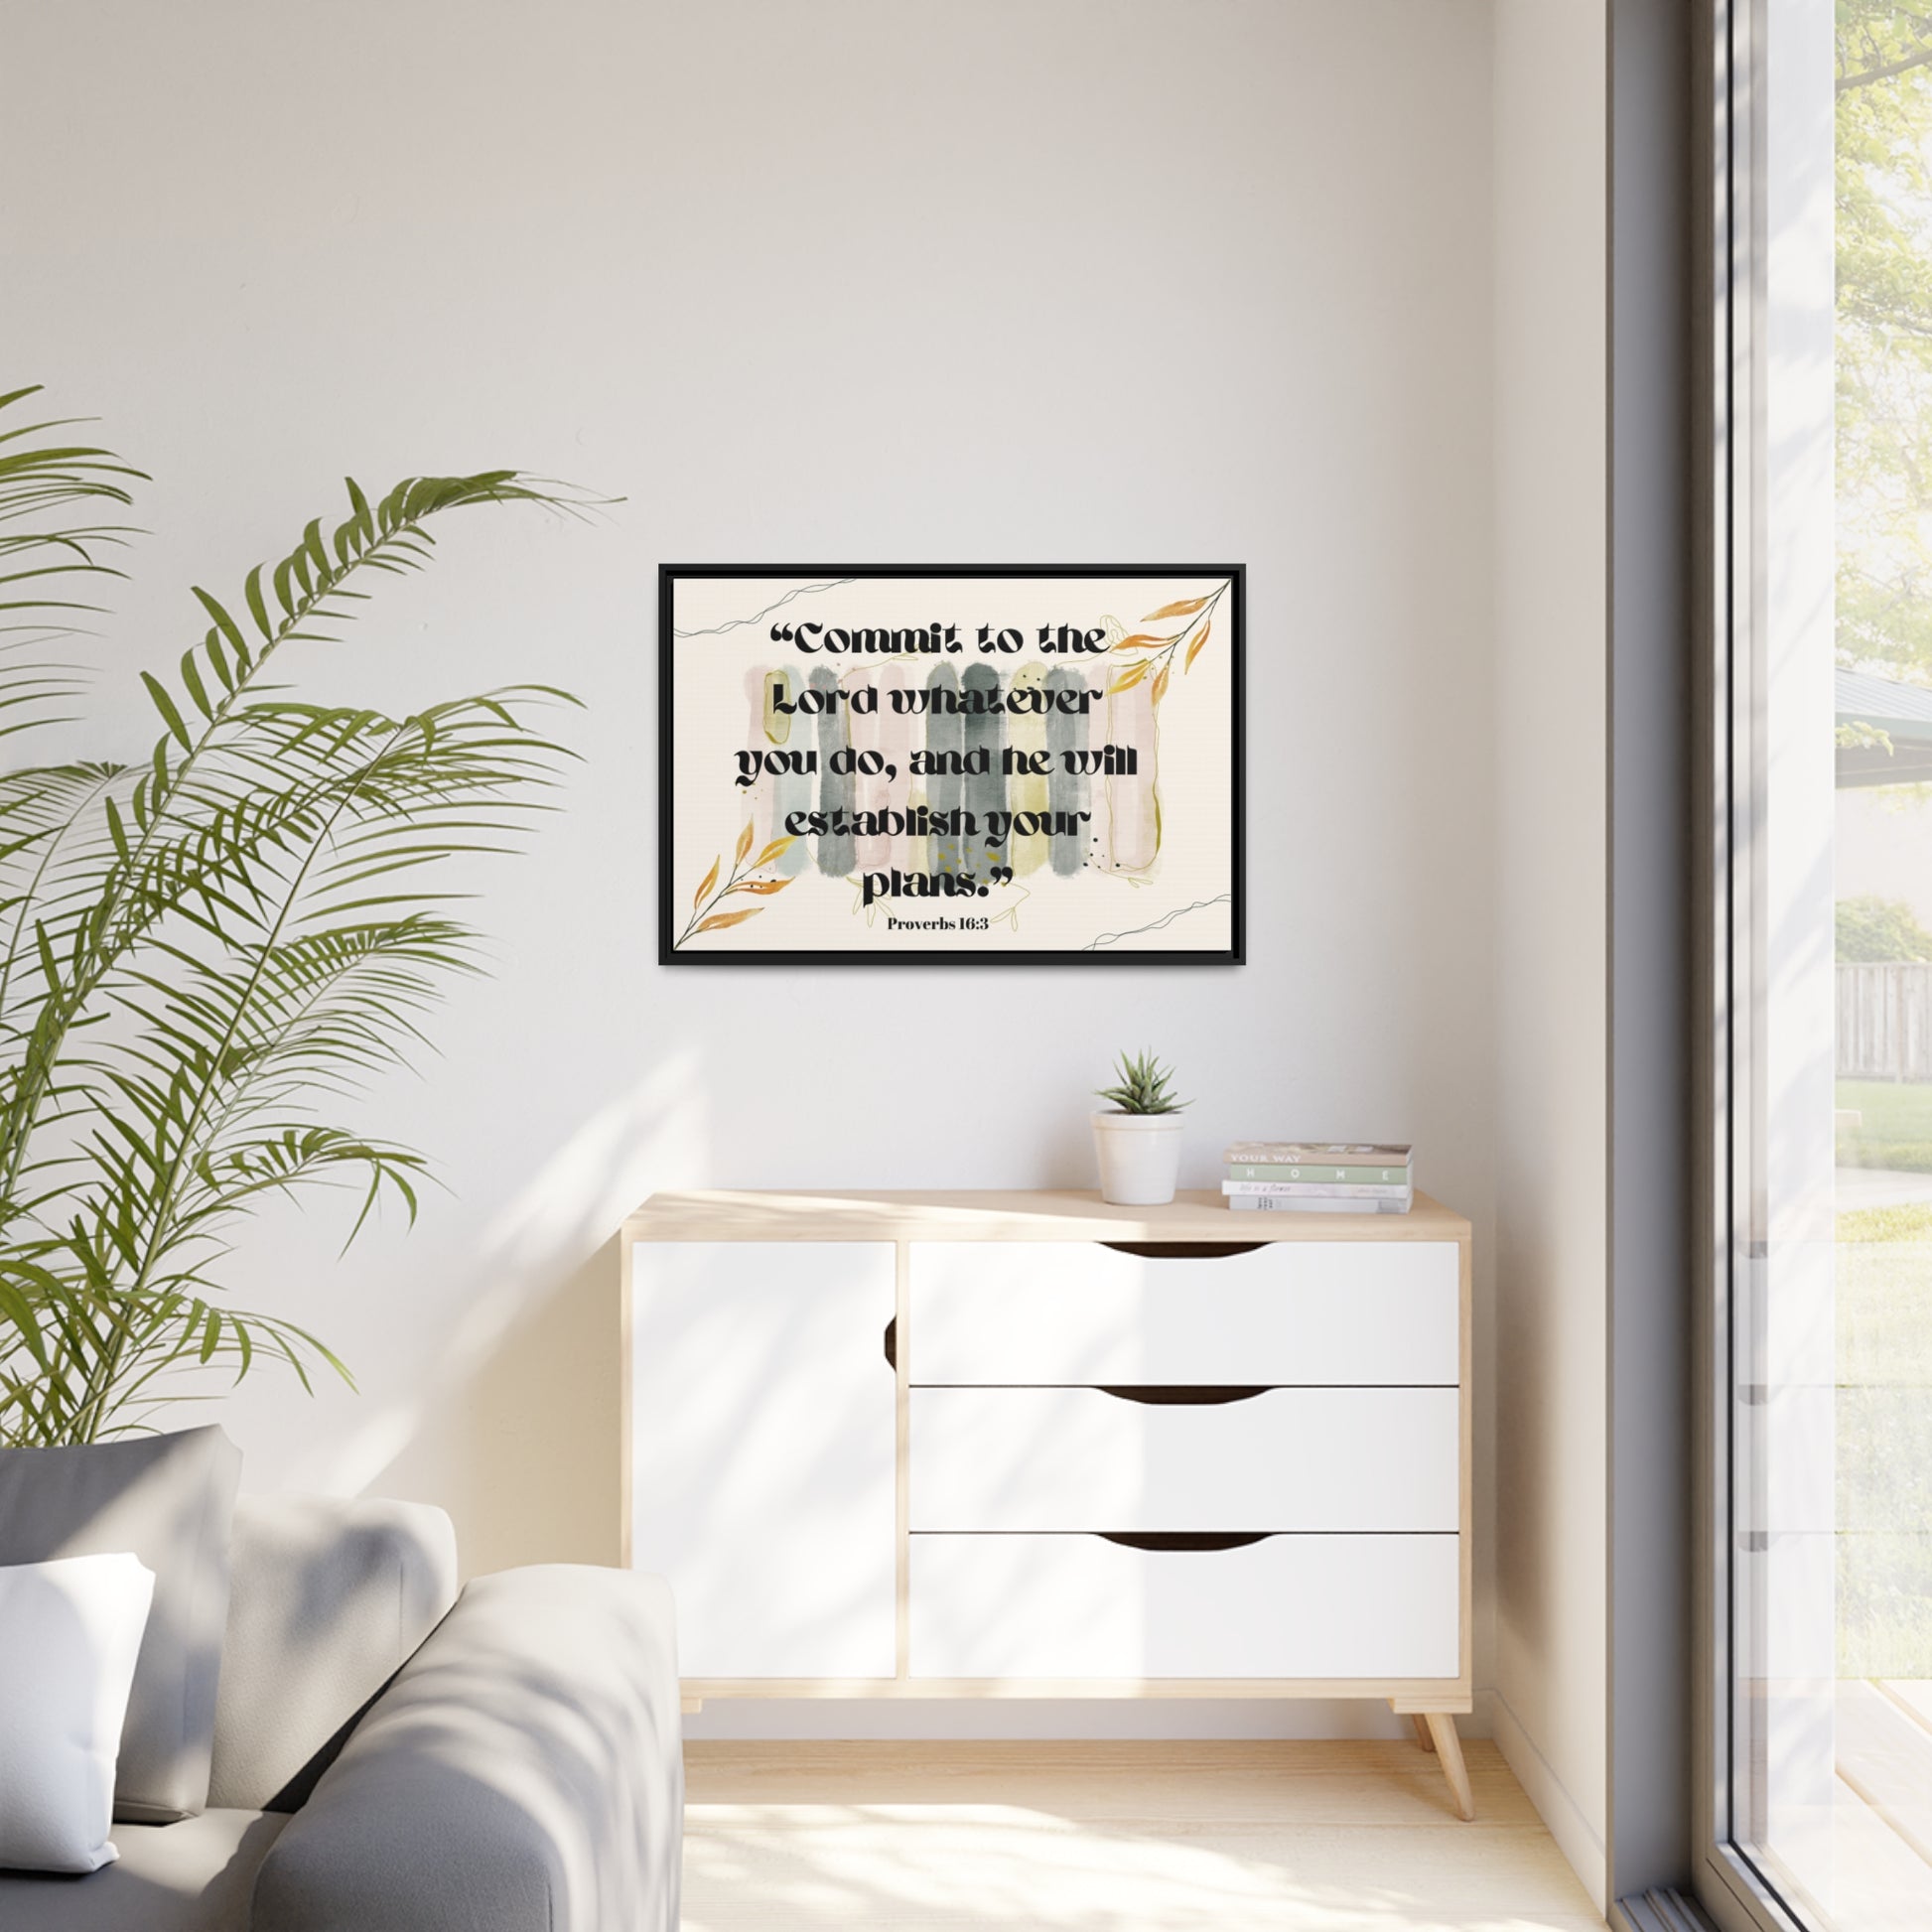 Framed Canvas Wall Art: Eco-Friendly, Vibrant Prints with Scriptural Verse | Art & Wall Decor,Canvas,Decor,Eco-friendly,Framed,Hanging Hardware,Home & Living,Summer Picks,Sustainable